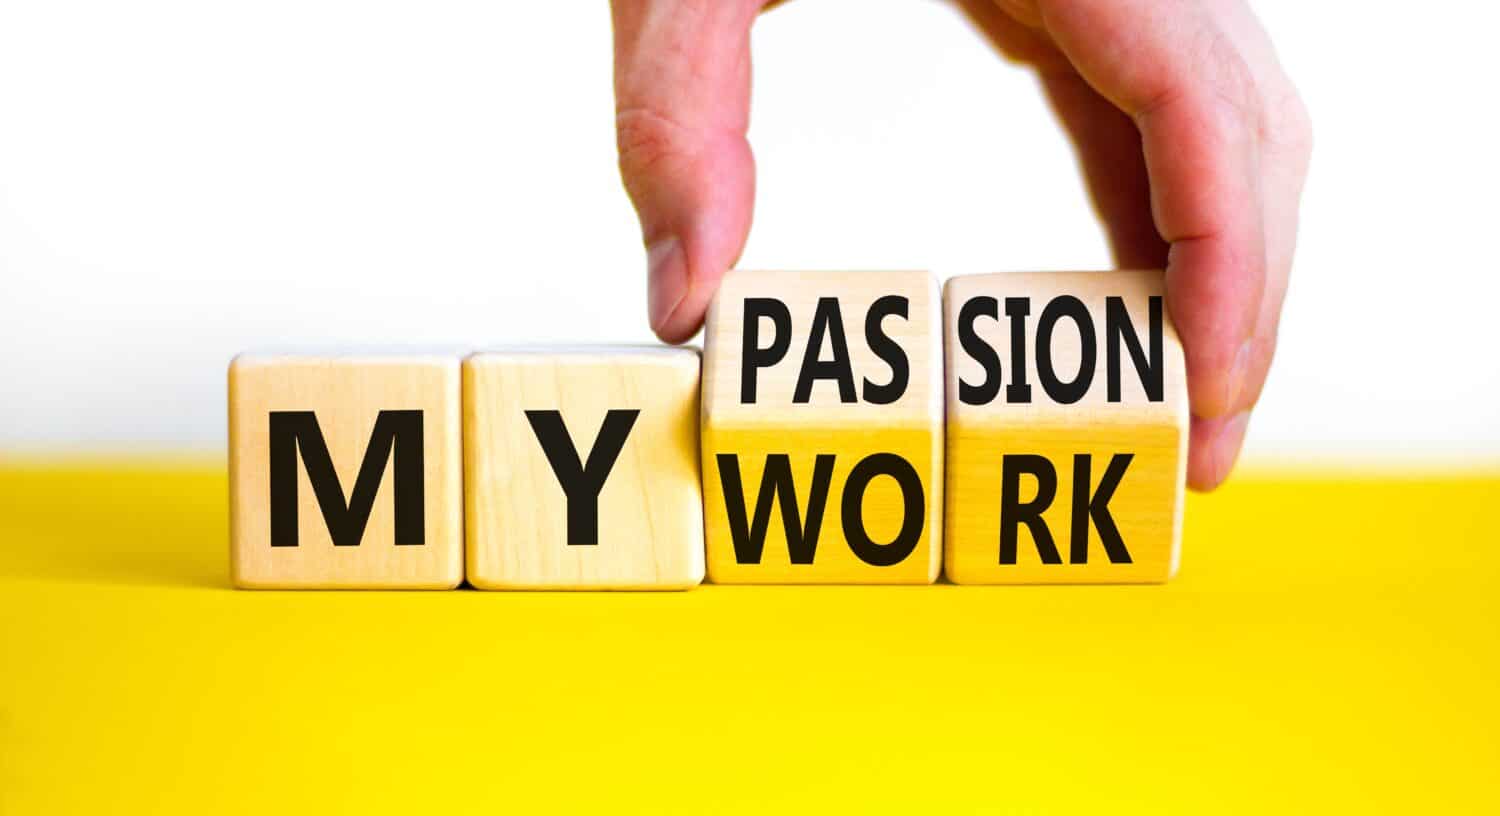 My work or passion symbol. Businessman turns wooden cubes and changes words 'My work' to 'My passion'. Beautiful white table, white background, copy space. Business and my work or passion concept.